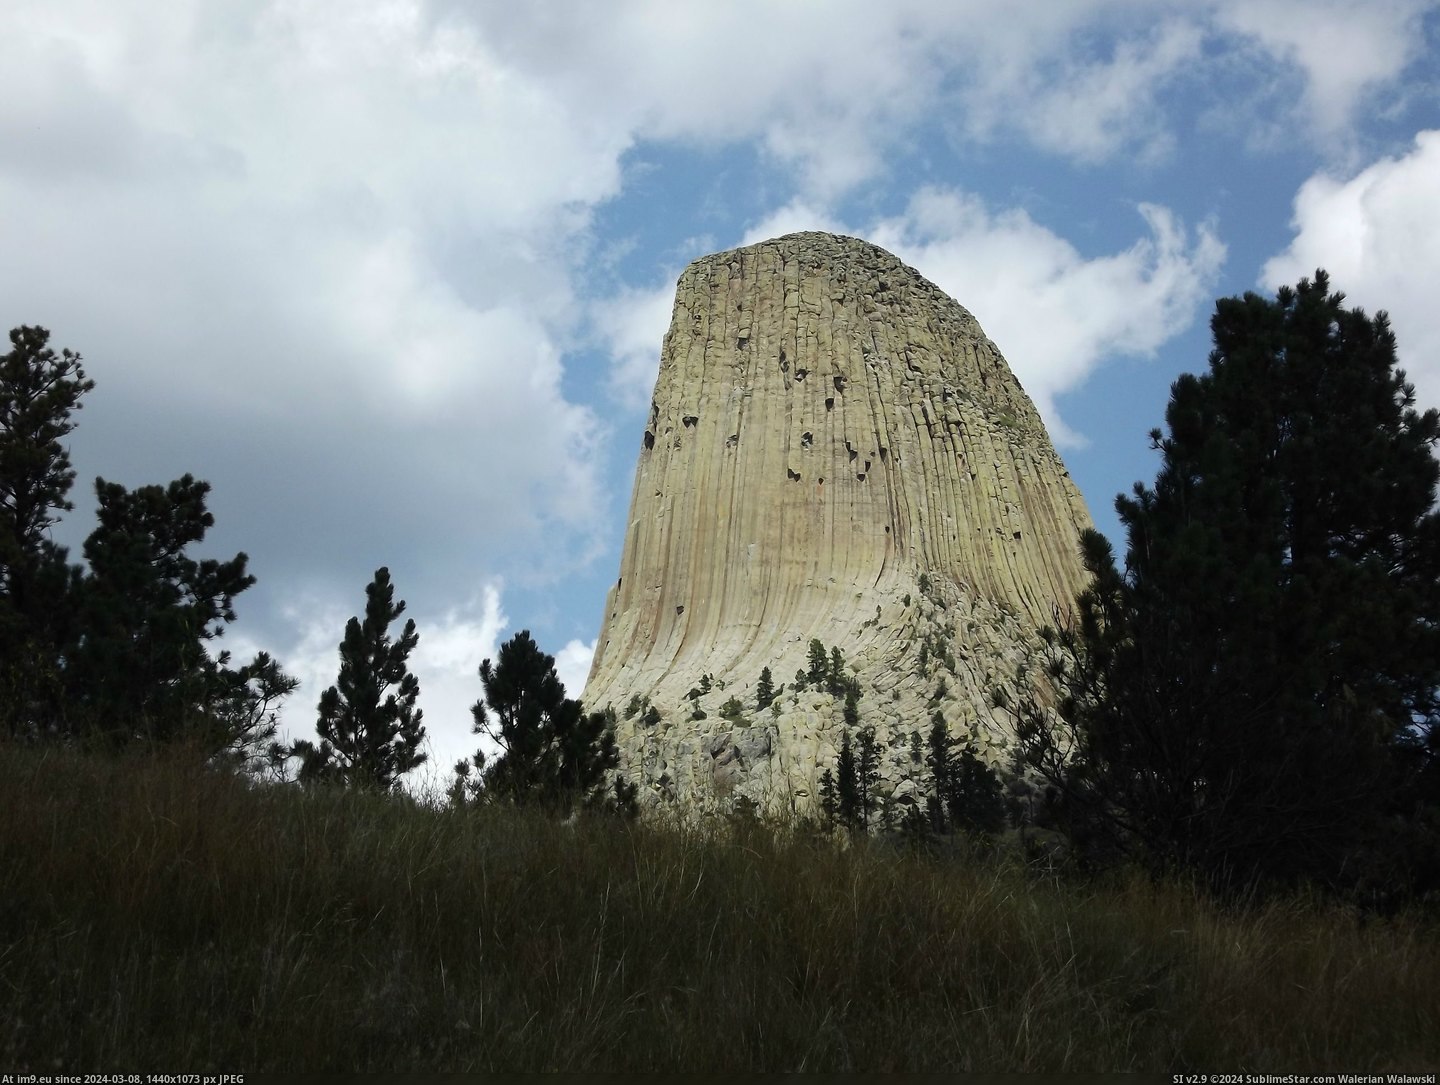 #Tower #Devil #Wyoming #Imposing #Mcginty #Impressive #Carroll #2572x1929 [Earthporn] The impressive and imposing Devil's Tower in Wyoming by C. McGinty-Carroll [2572x1929] Pic. (Изображение из альбом My r/EARTHPORN favs))